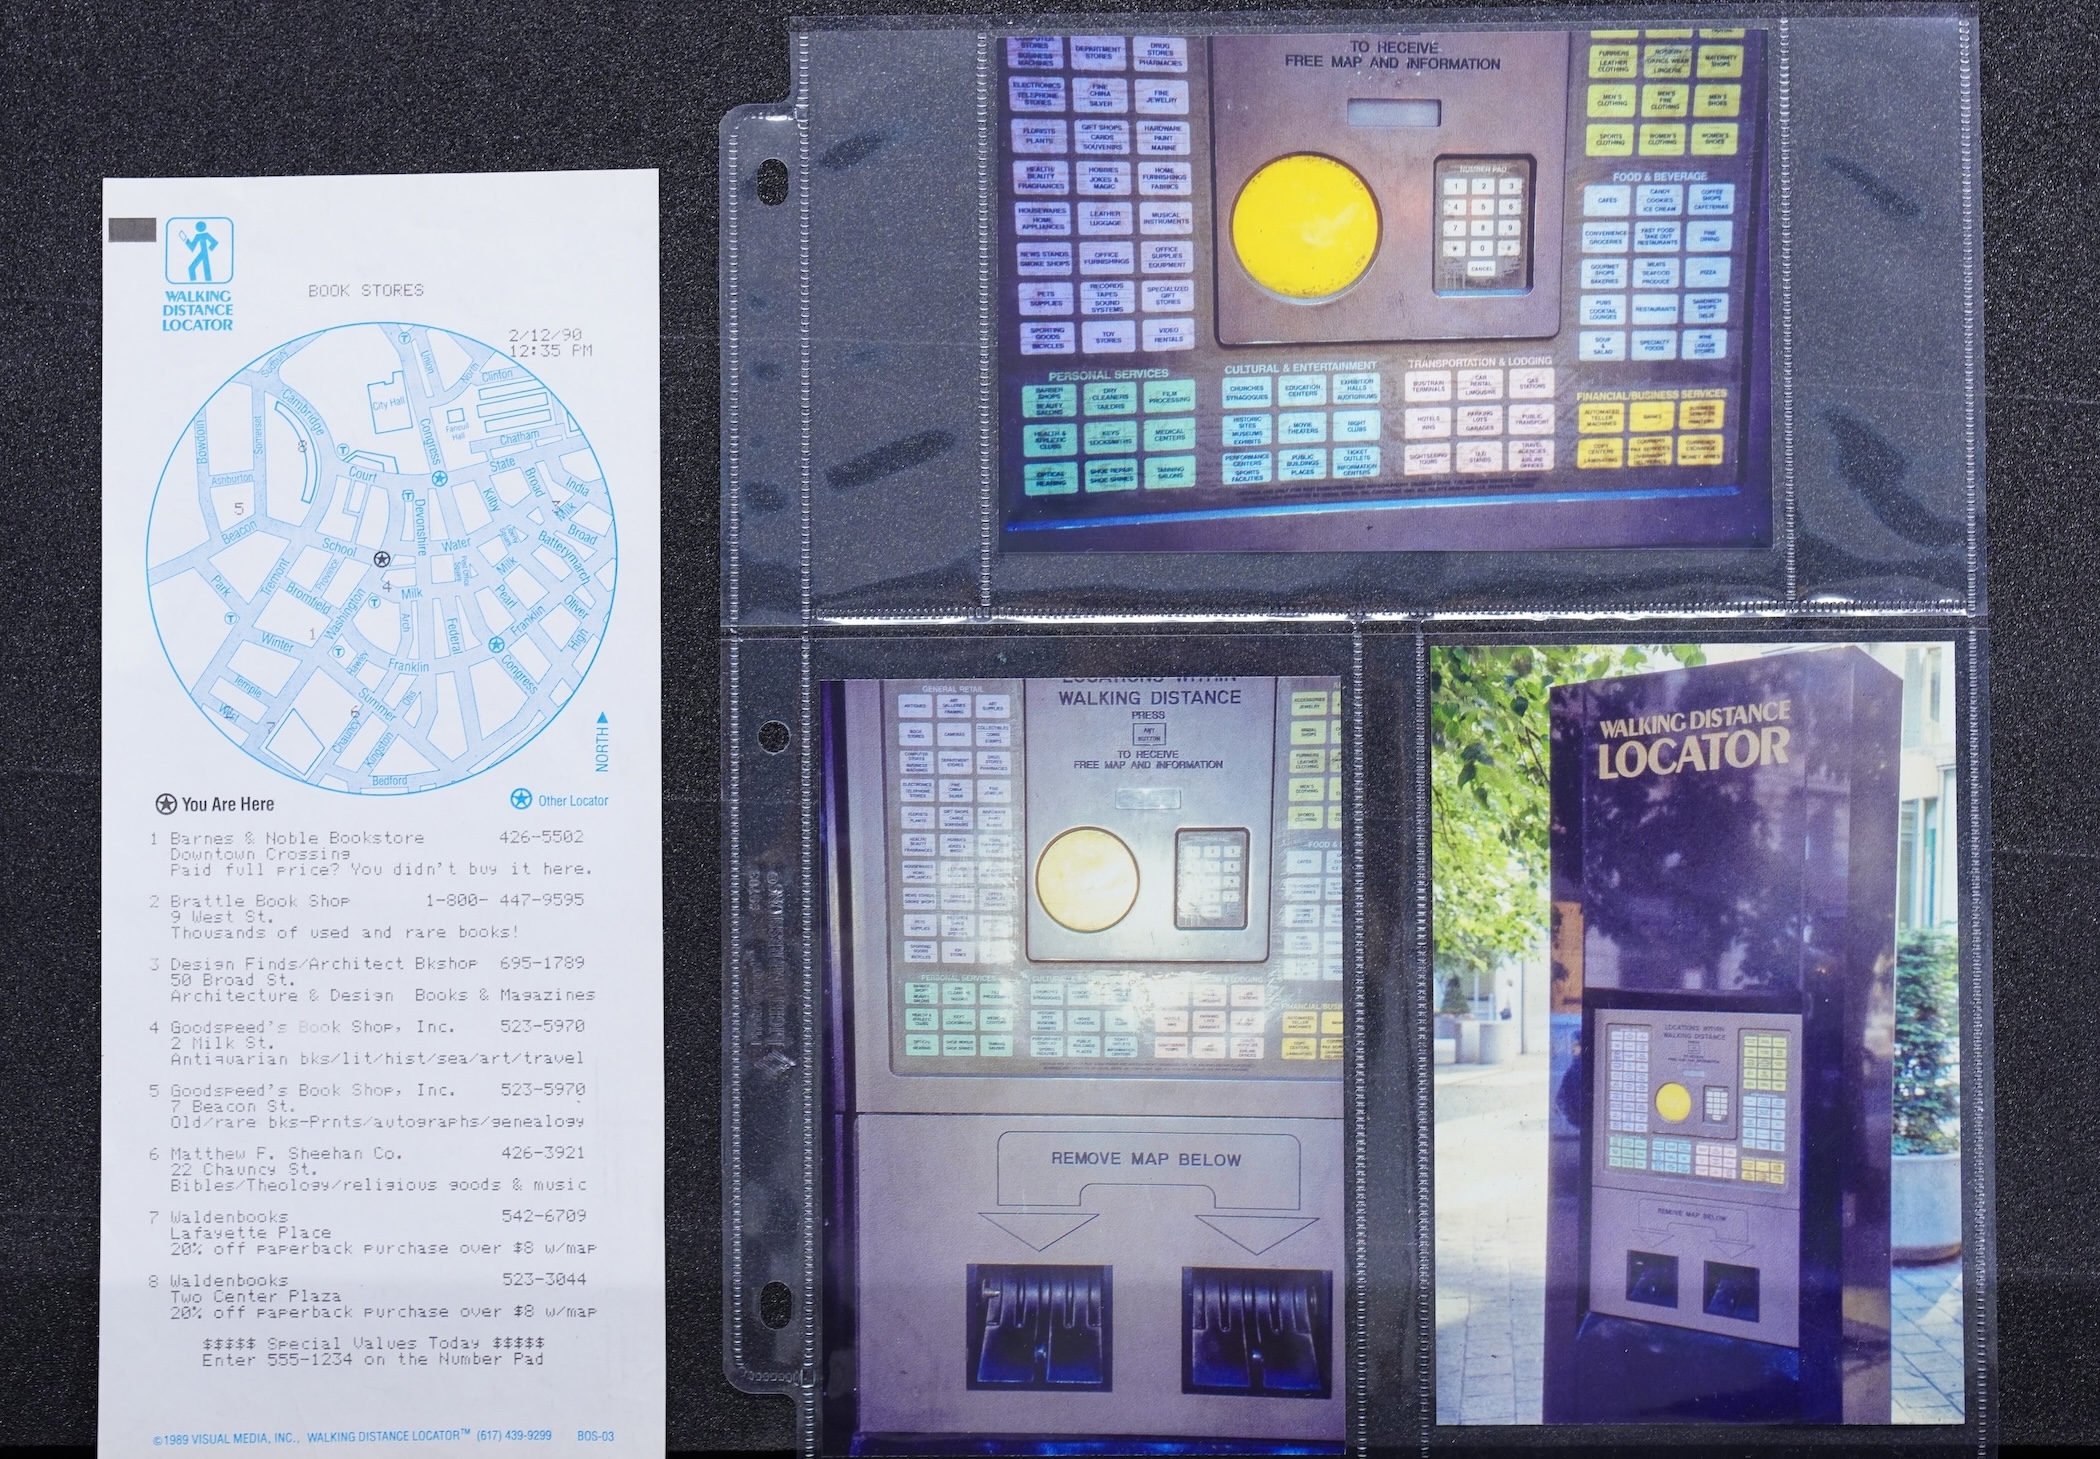 A printout from the Walking Distance Locator kiosk, alongside photos of the kiosk installed in the park at the corner of Washington and School Streets..